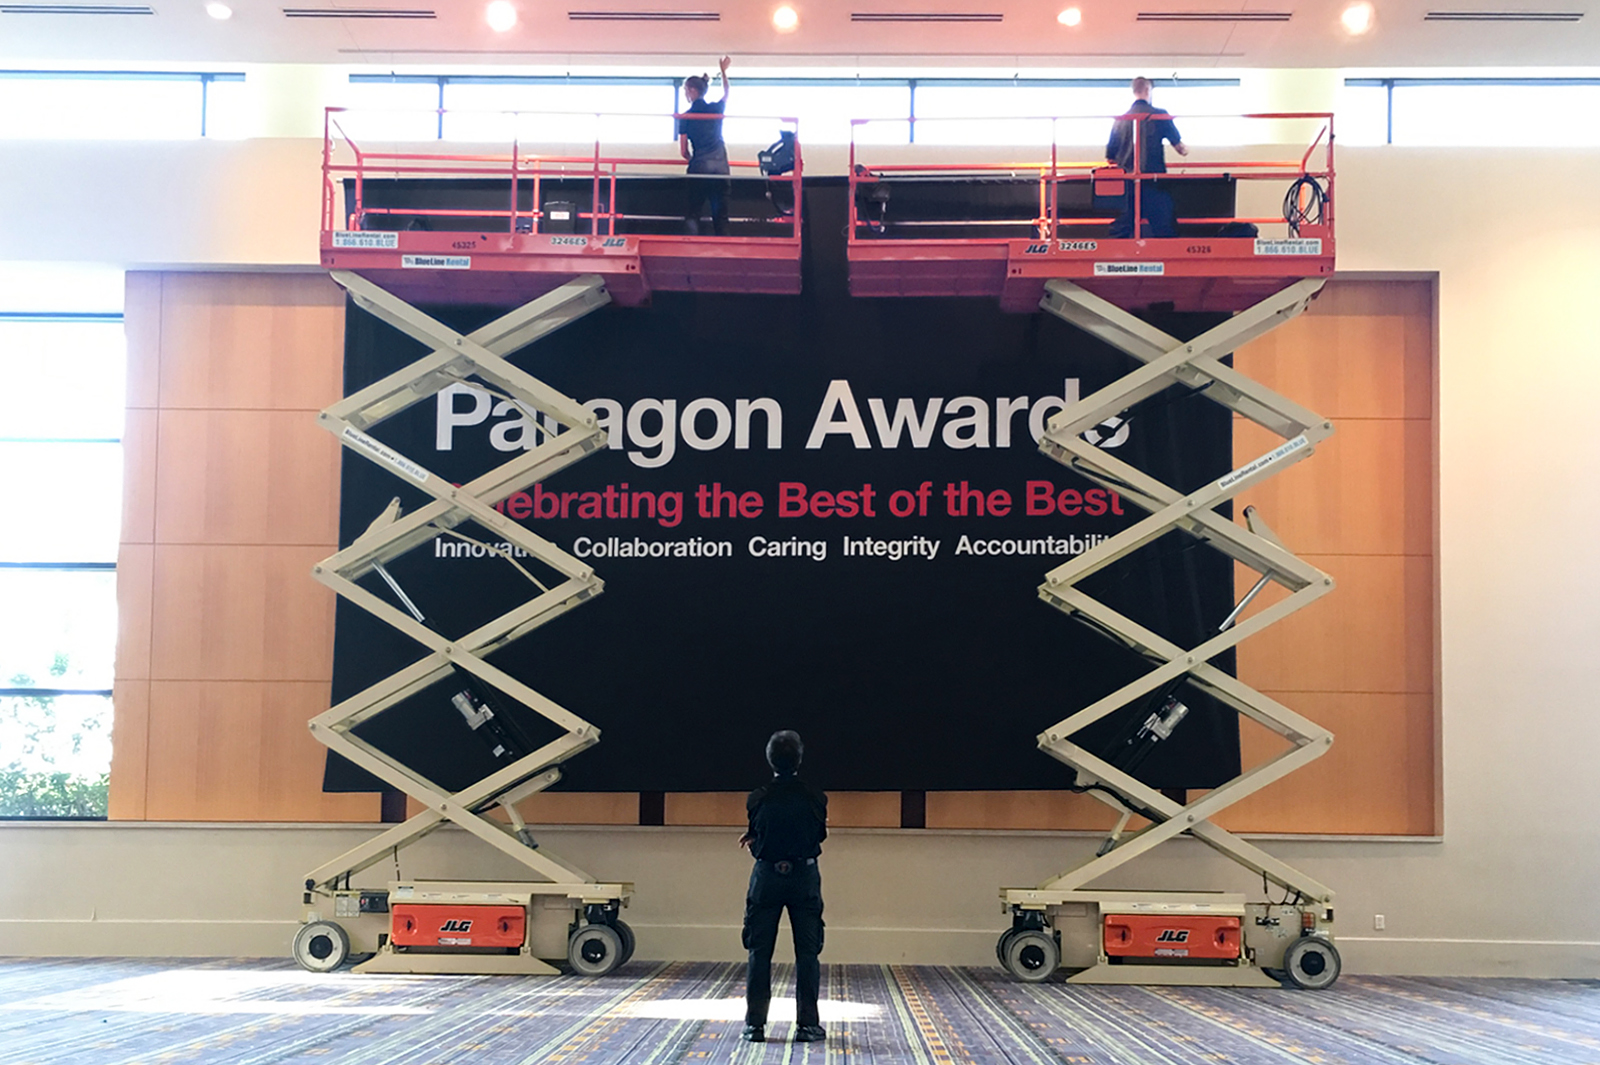 CVS Paragon Awards banner being raised by add ventures crews with cherry pickers.